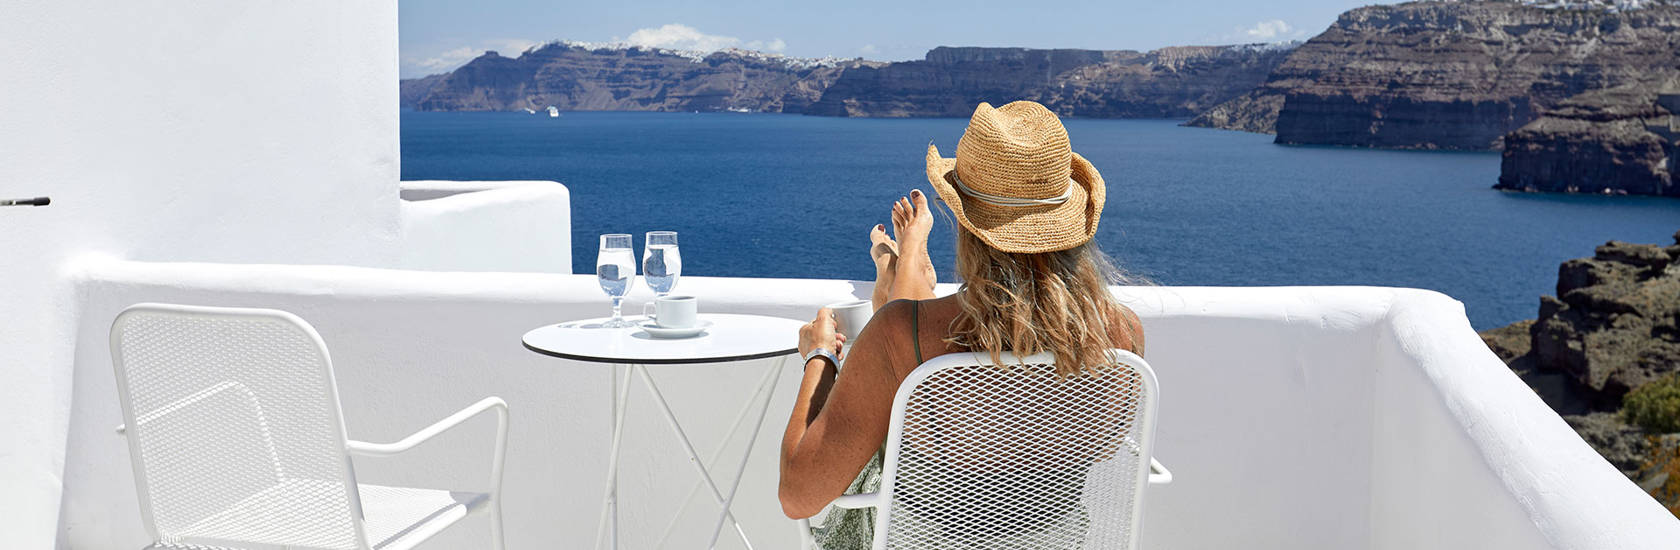 
Santorini View Hotel woman with a hat seating at a sea view balcony enjoying the view and drinking coffee